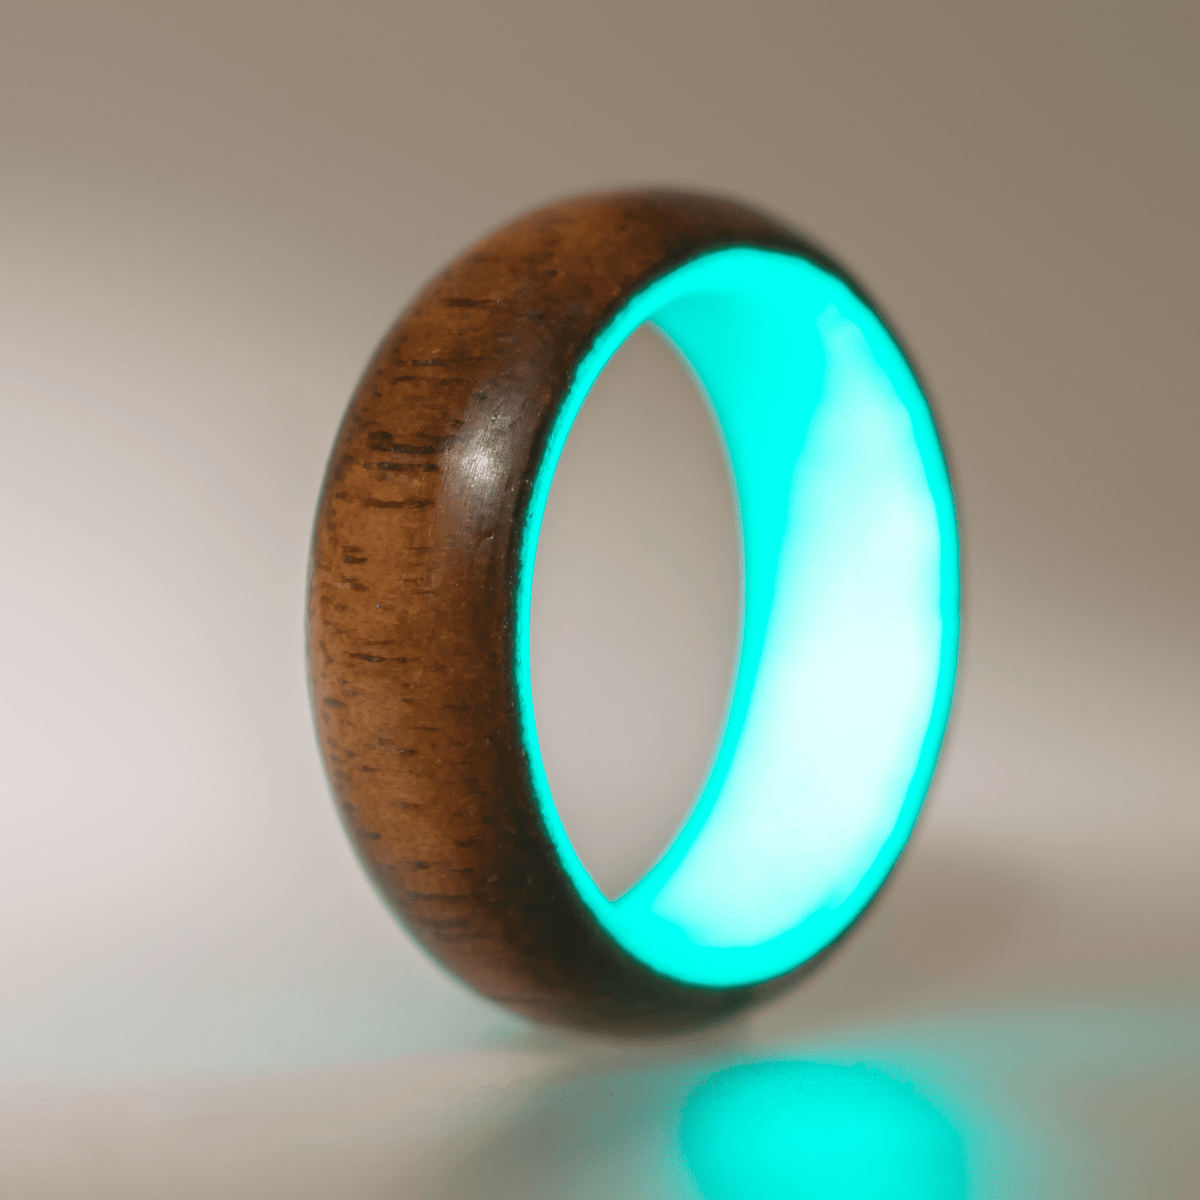 Turquoise glow ring with walnut wood exterior. 